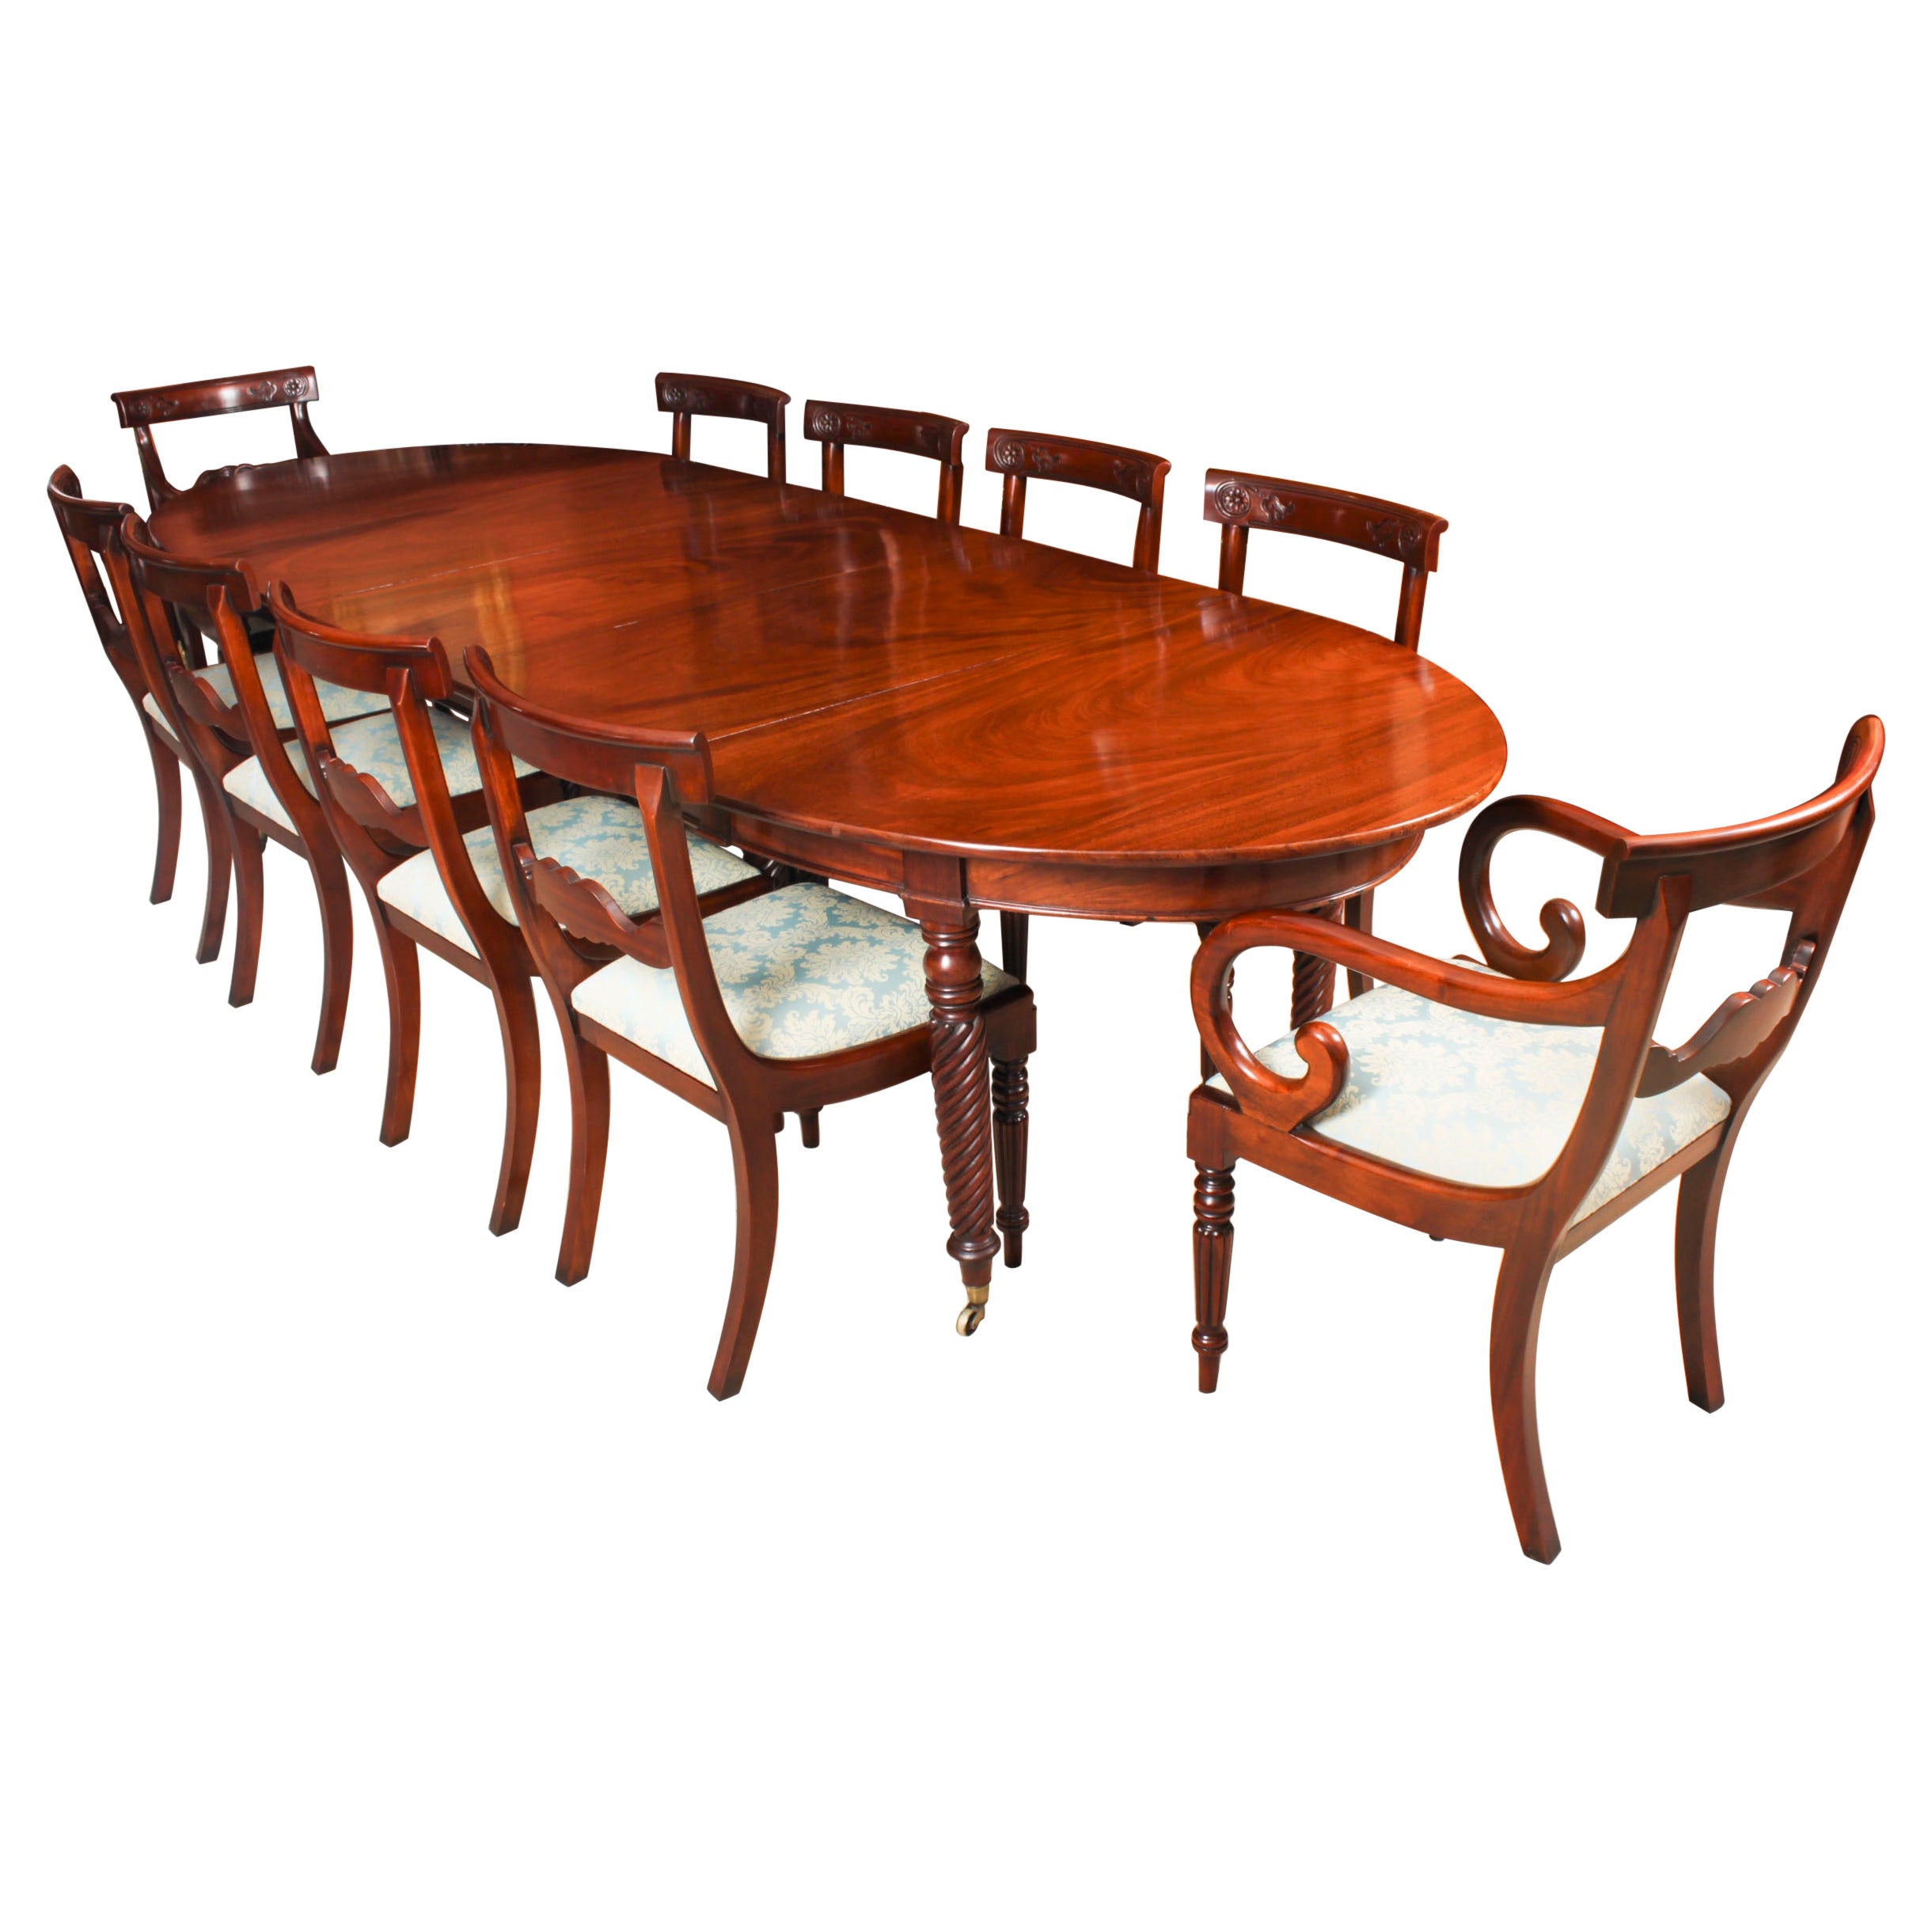 Antique Regency Concertina Action Dining Table 19th C & 10 chairs For Sale